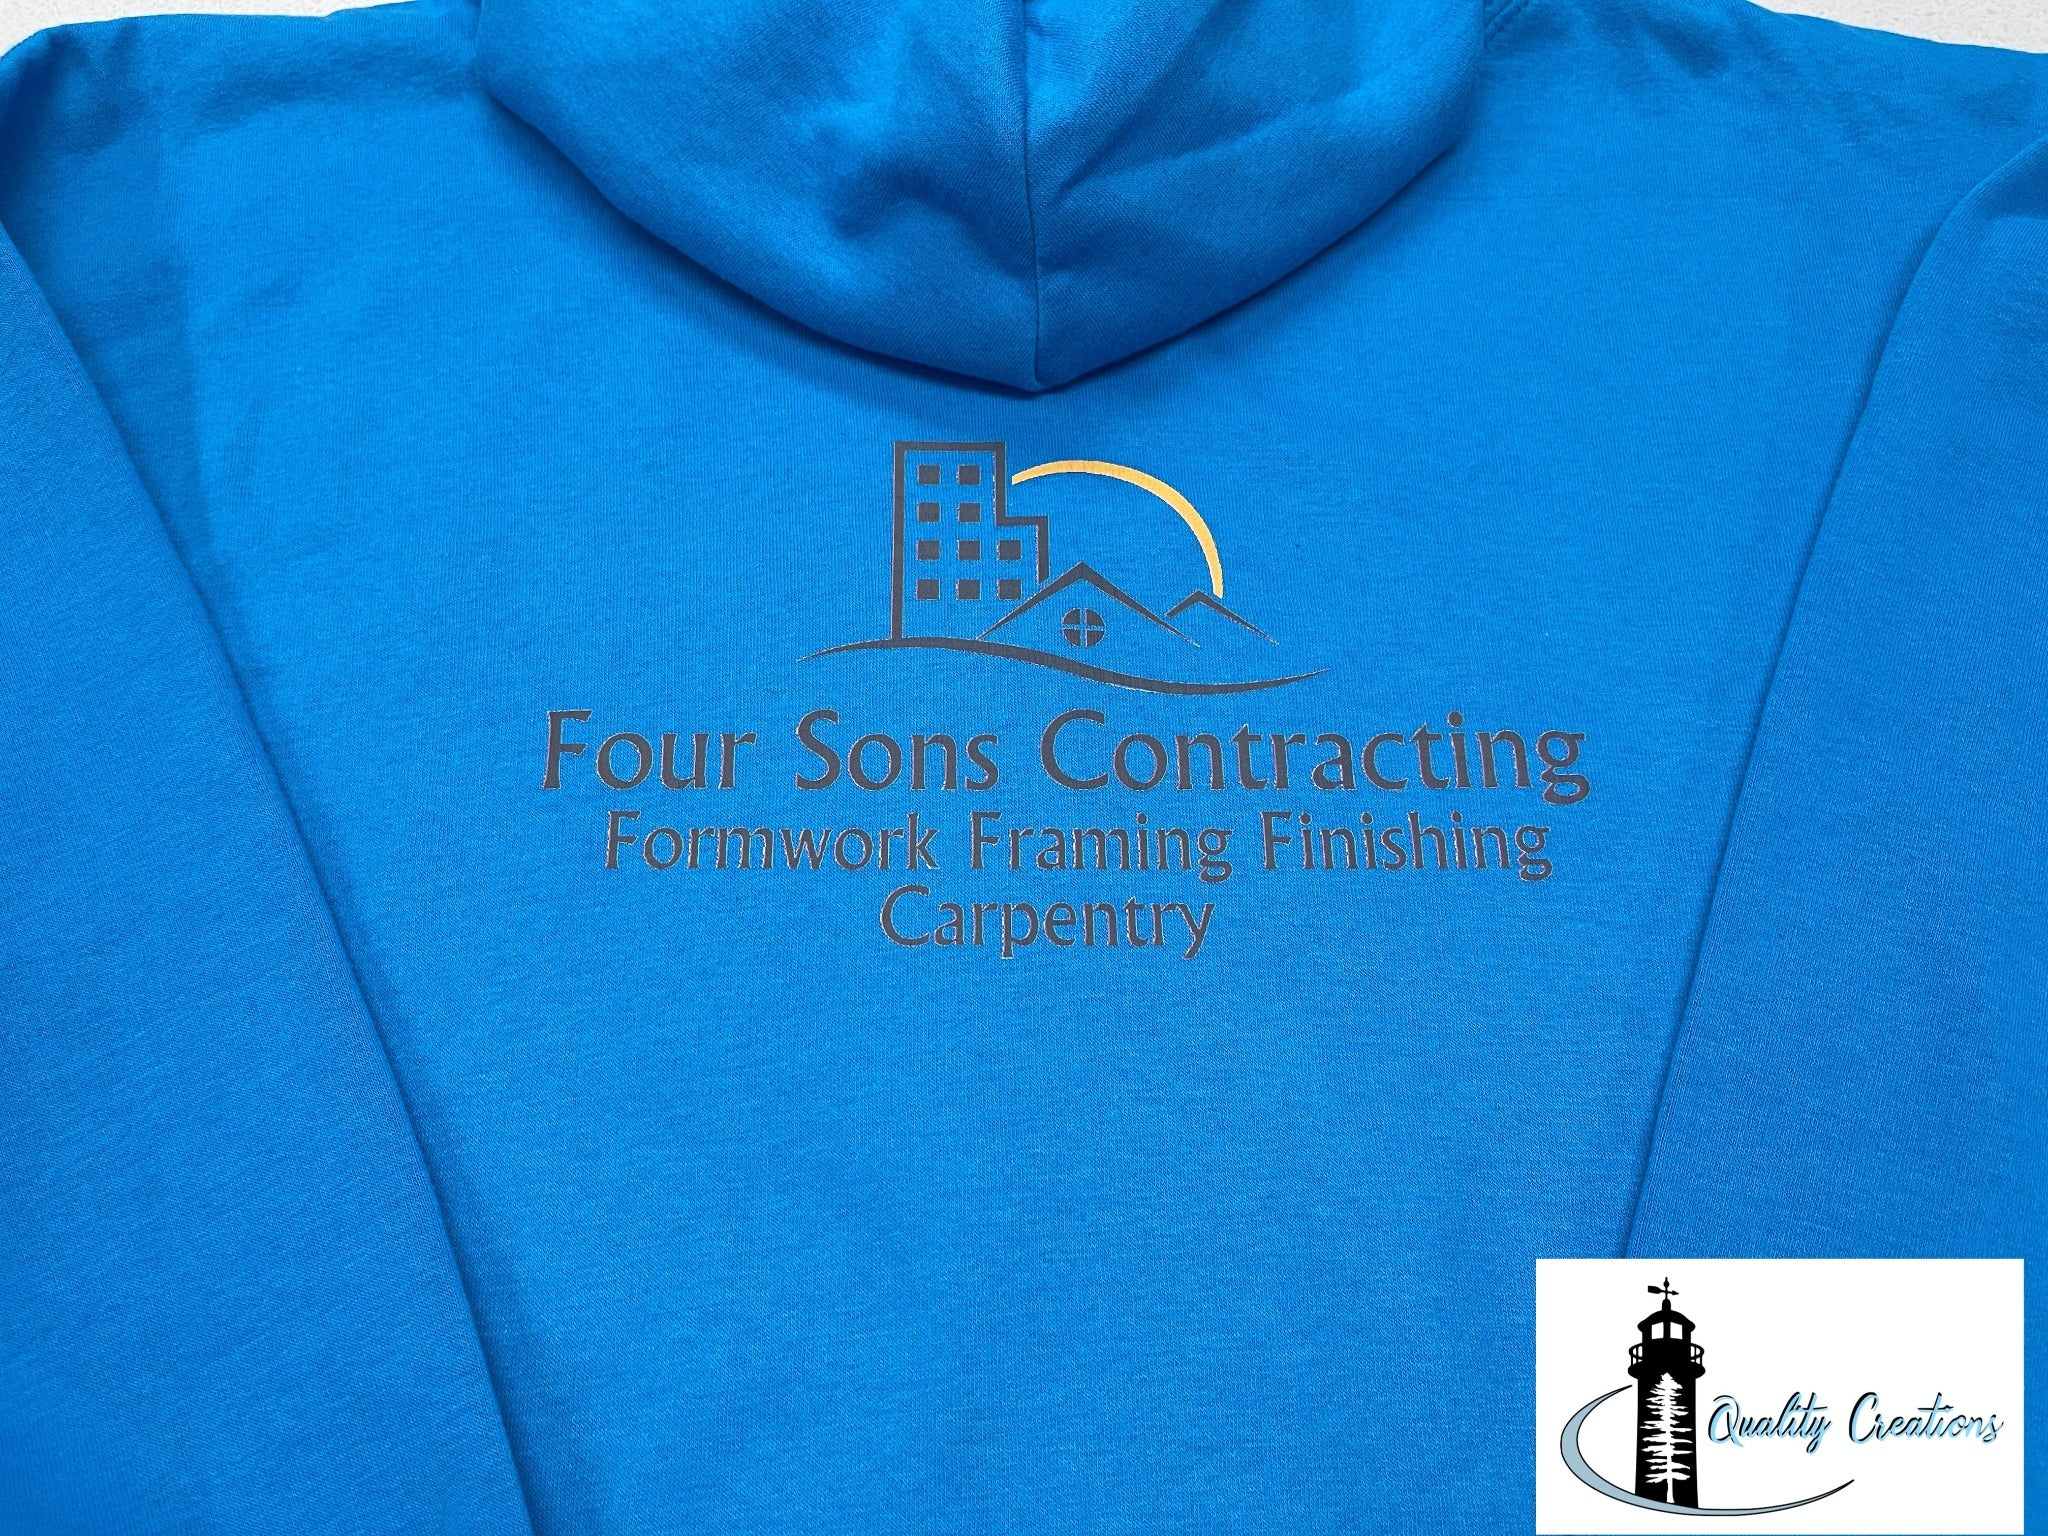 four sons contracting blue hoodie moncton salisbury newbrunswick canada logo business quality creations